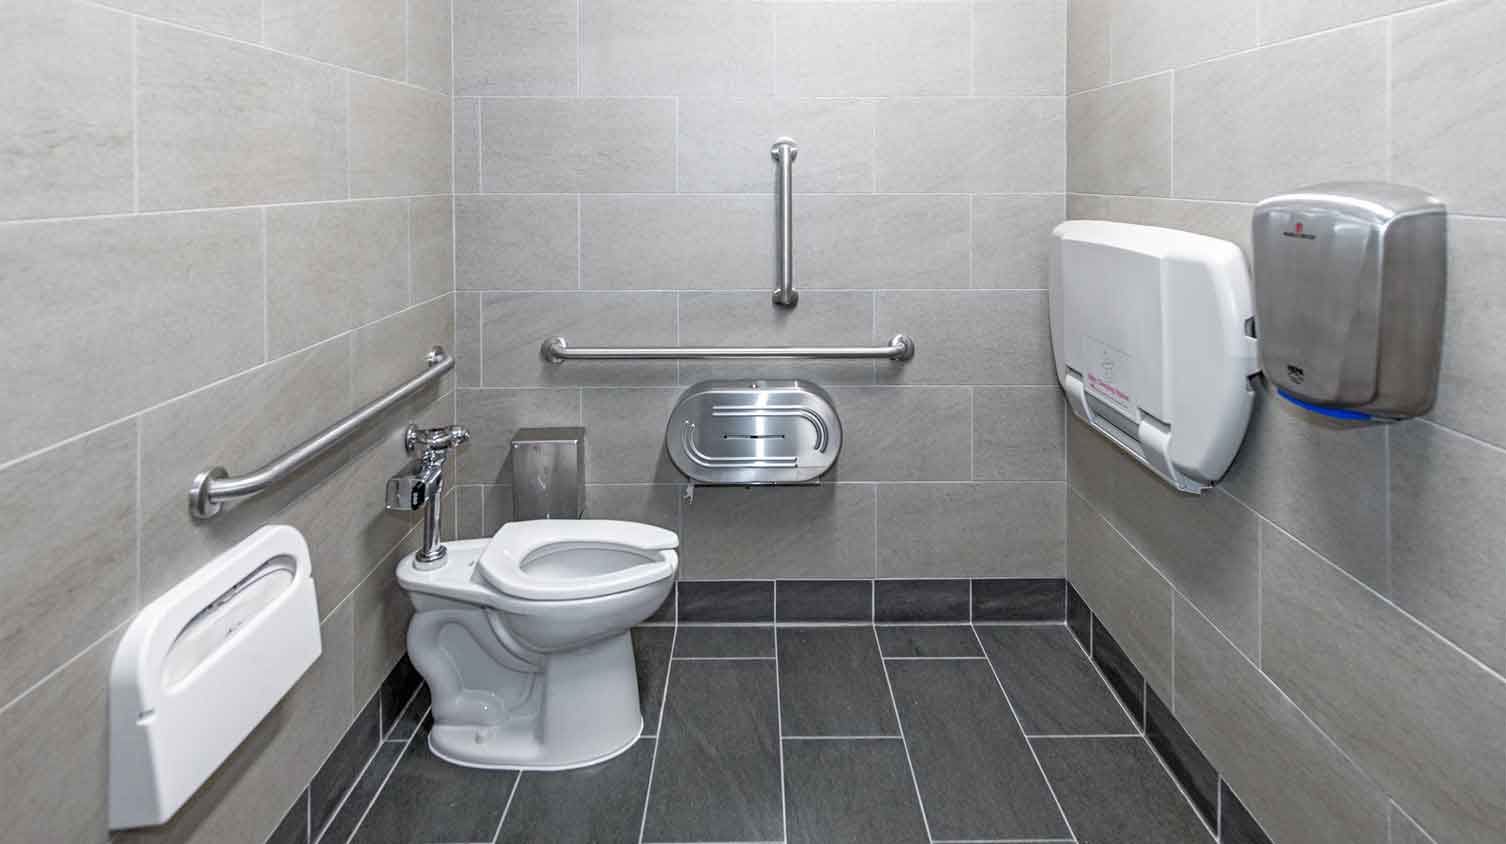 Interior shot of an accessible bathroom stall